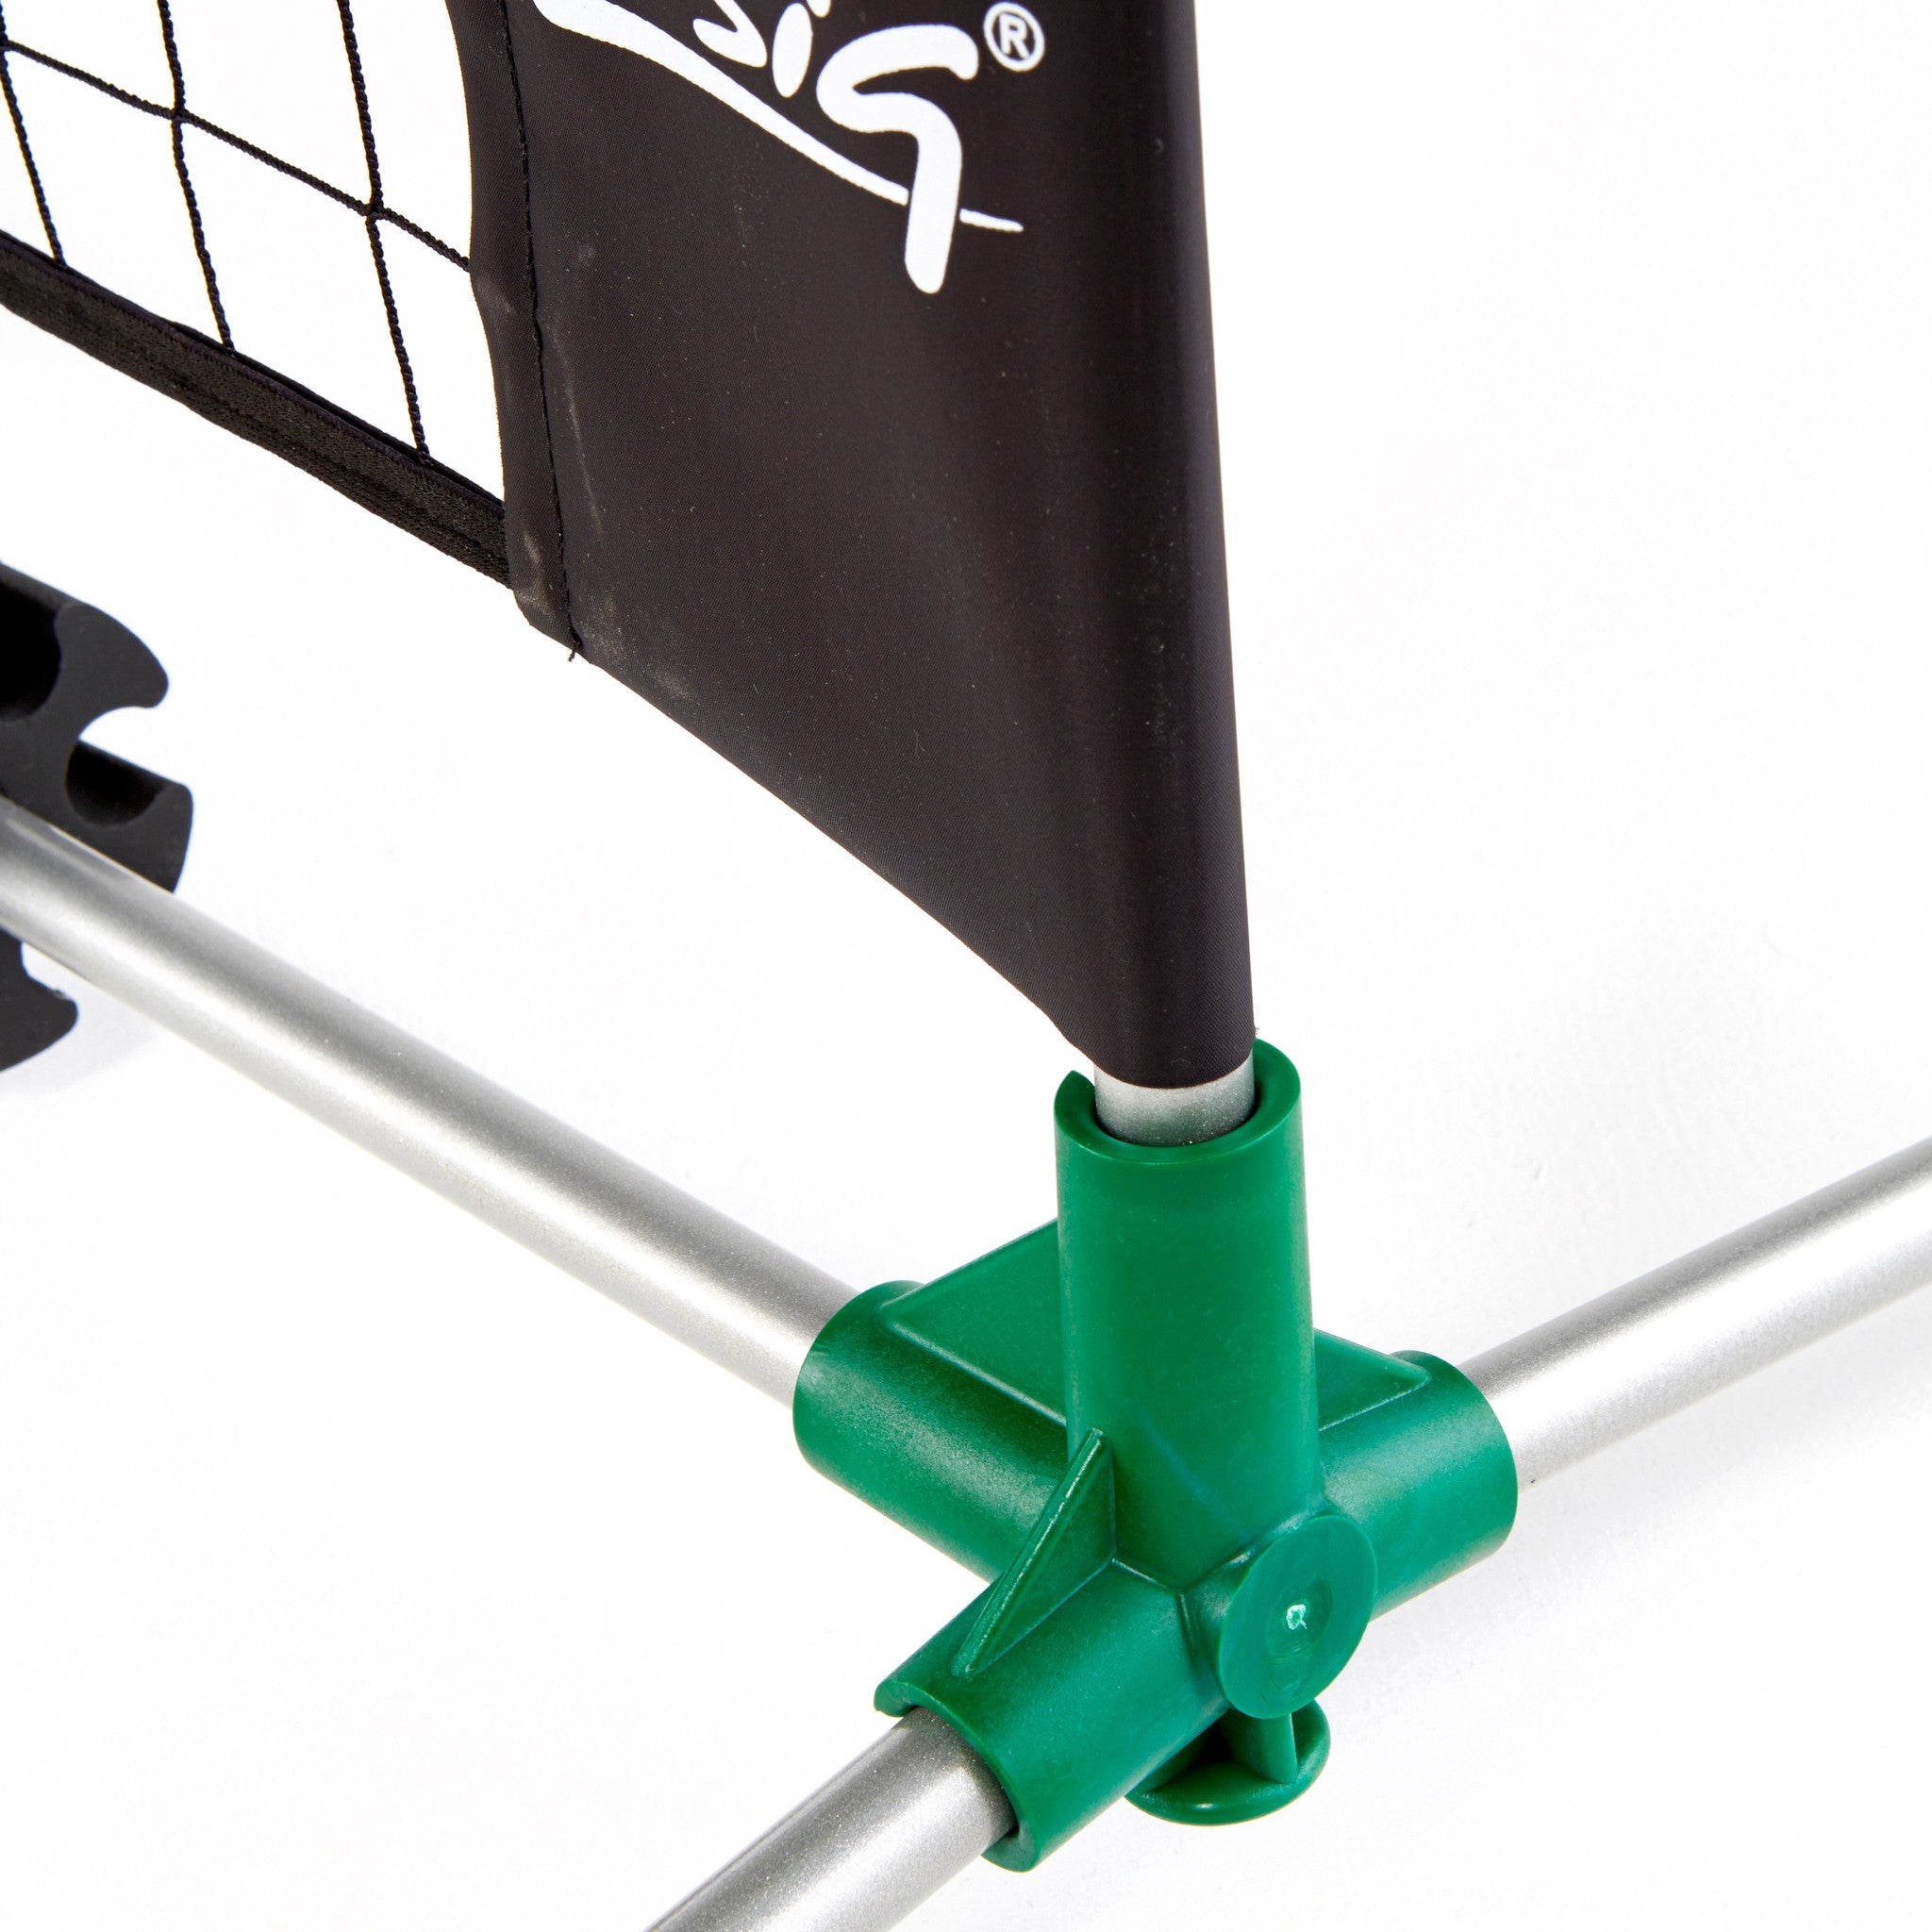 Mini Tennis Net 3m System with Zsig's new patented shoulder joint